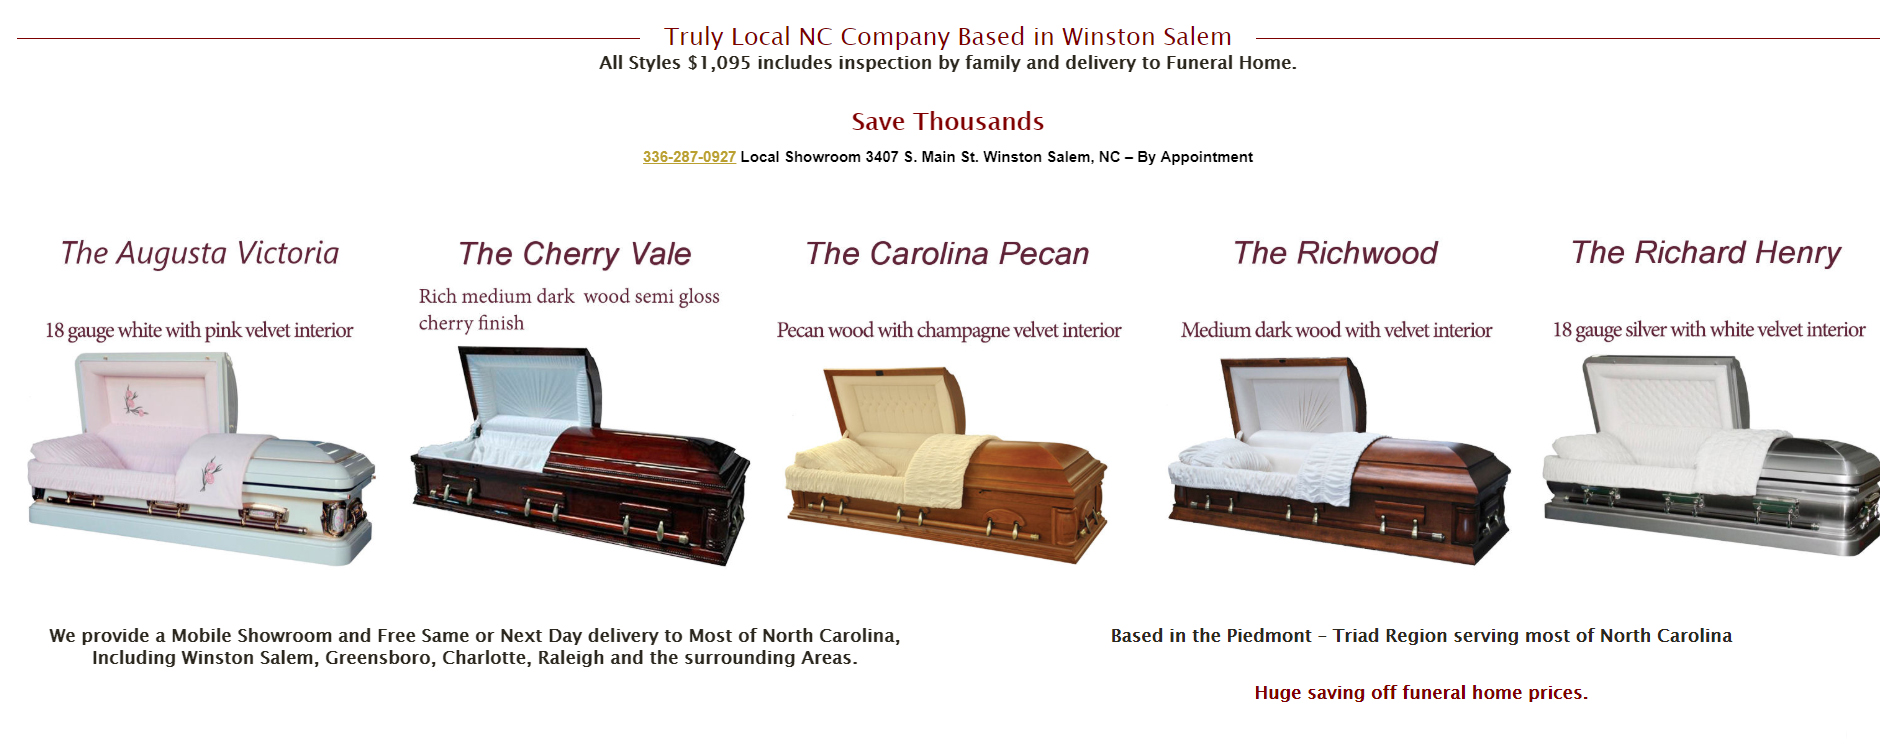 Local Nc Casket Store Opens Retail Showroom In Winston Salem Nc